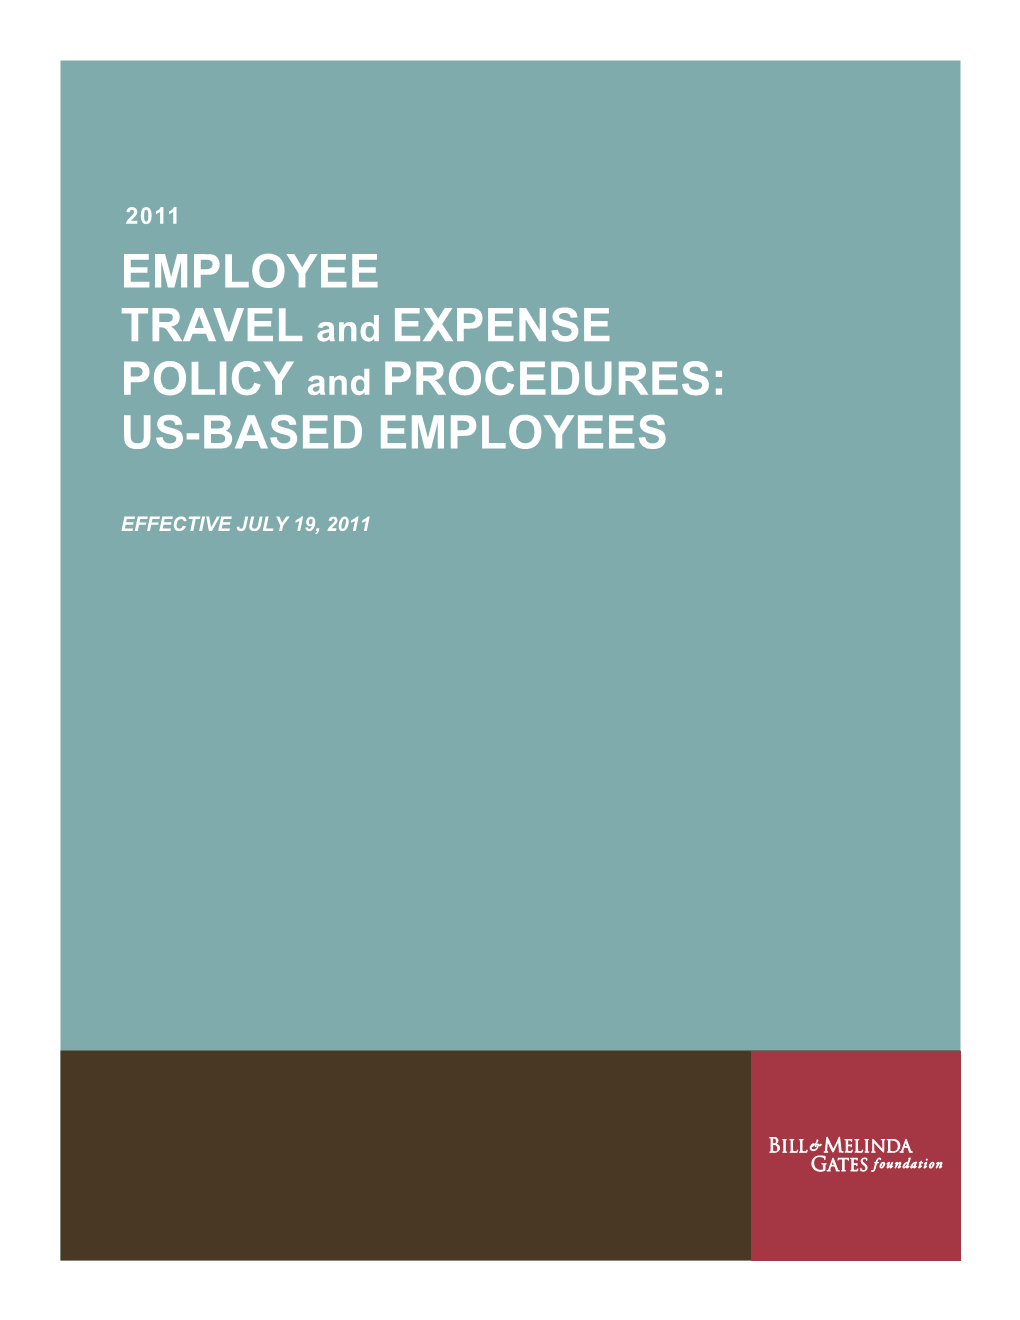 EMPLOYEE TRAVEL and EXPENSE POLICY and PROCEDURES: US-BASED EMPLOYEES